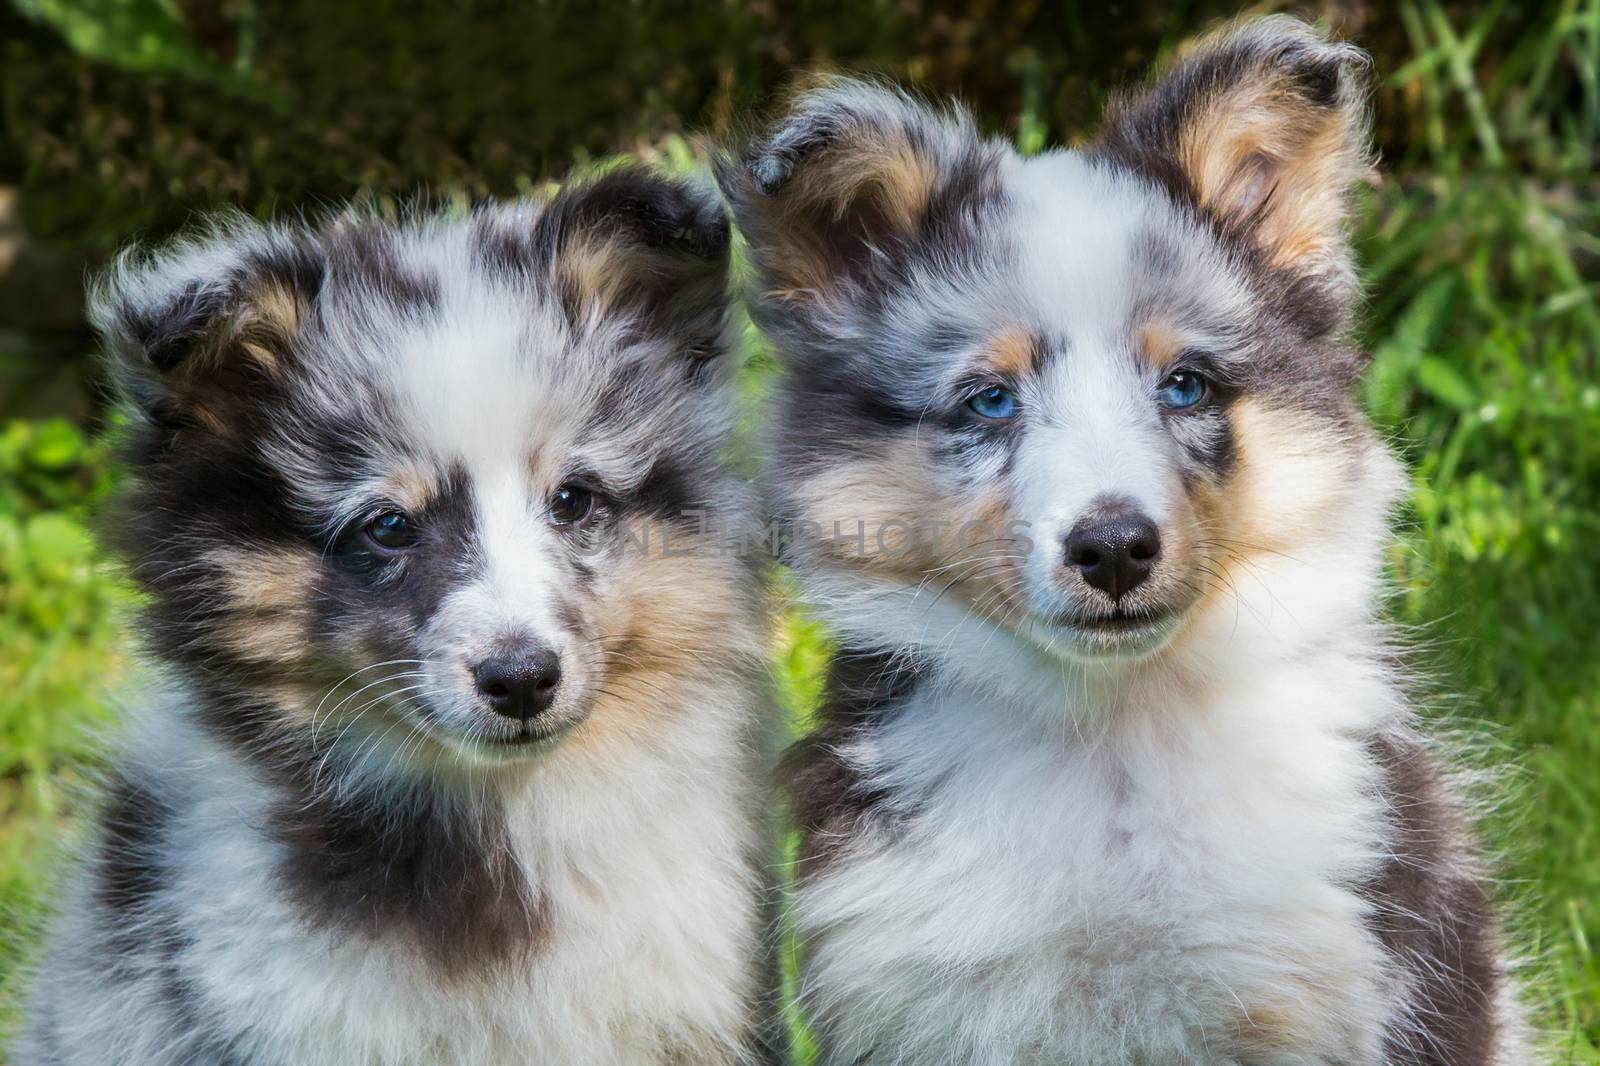 Portrait of two young sheltie dogs by BenSchonewille